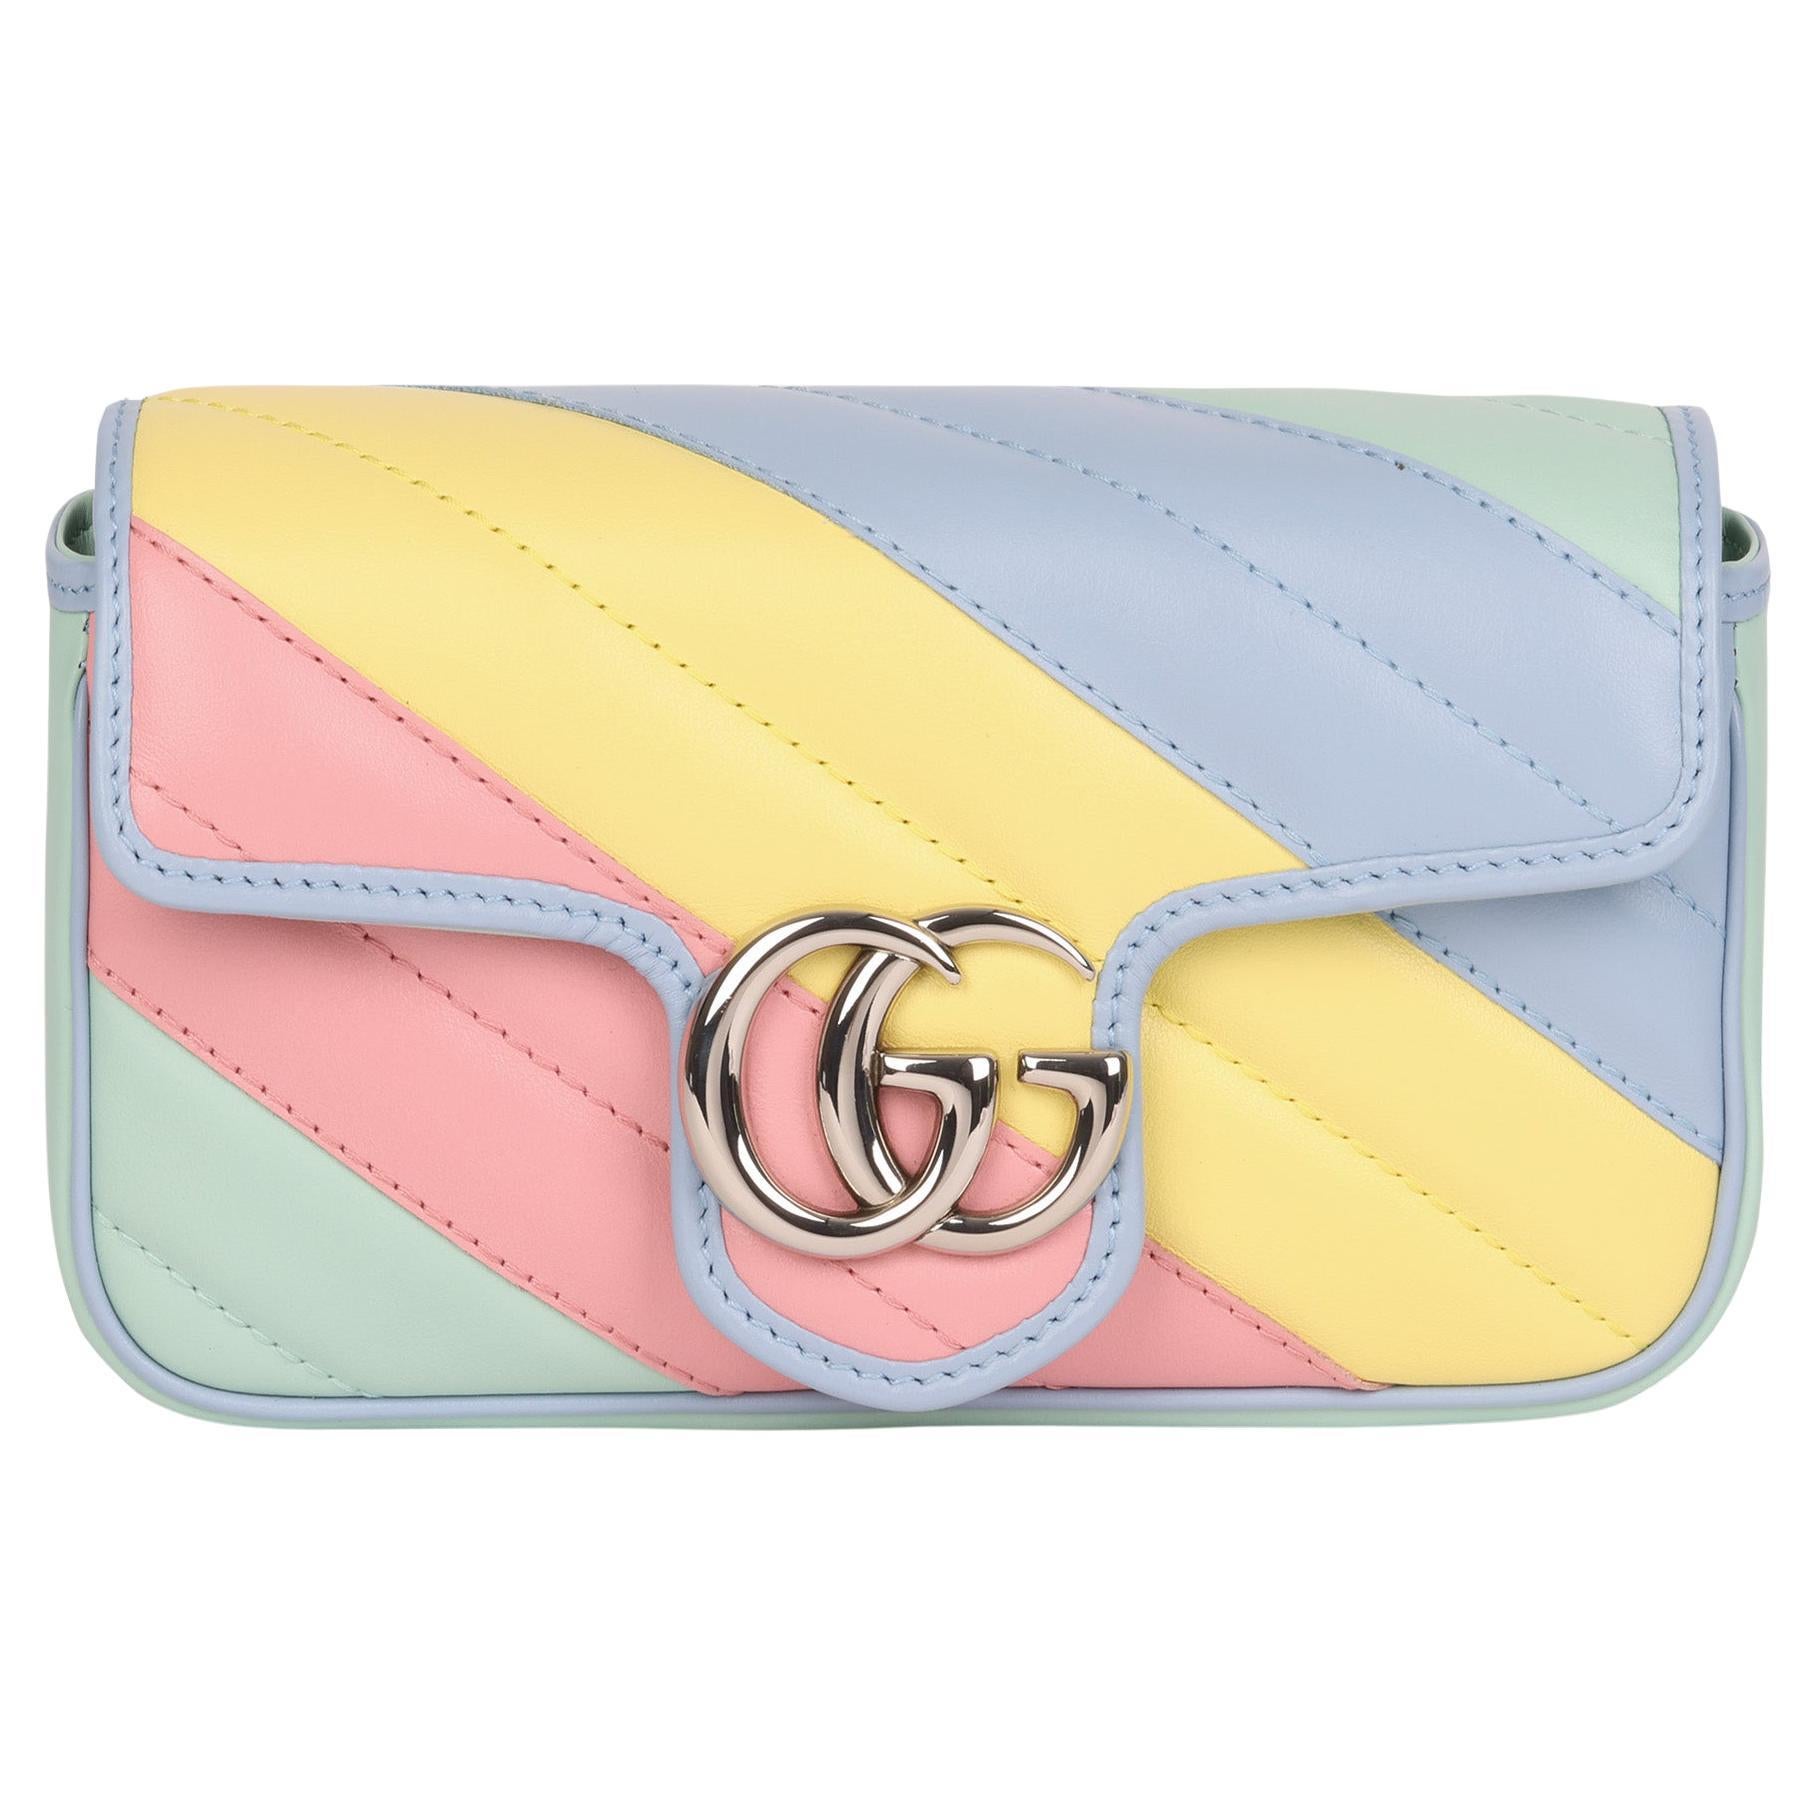 2010 Gucci Green, Yellow, Pink & Blue Quilted Calfskin Leather Mini Marmont 